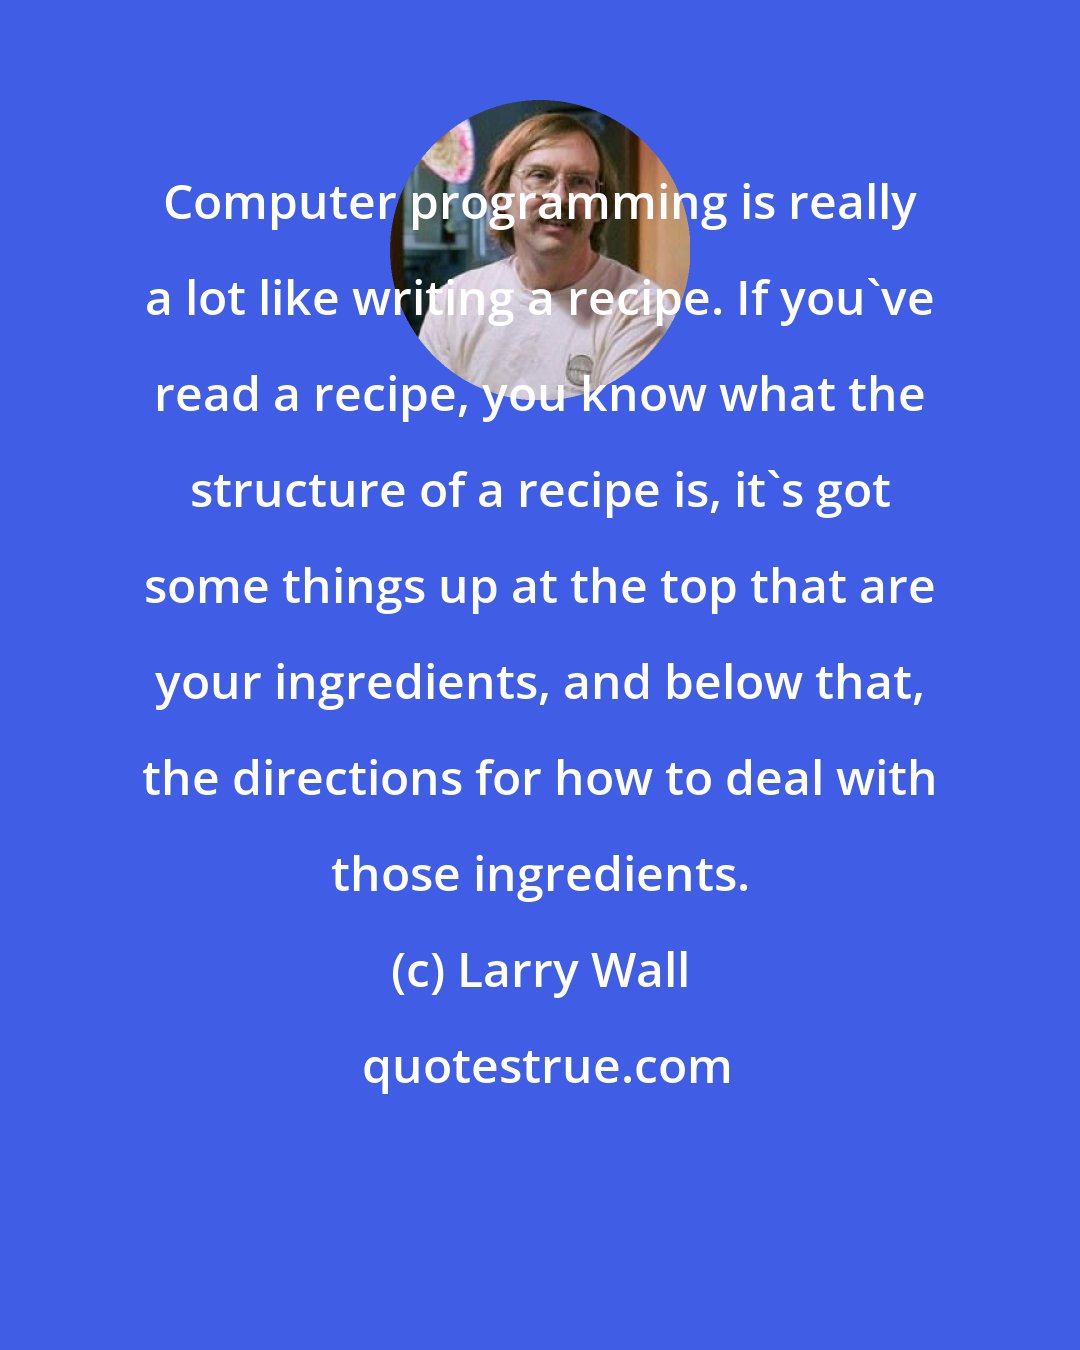 Larry Wall: Computer programming is really a lot like writing a recipe. If you've read a recipe, you know what the structure of a recipe is, it's got some things up at the top that are your ingredients, and below that, the directions for how to deal with those ingredients.